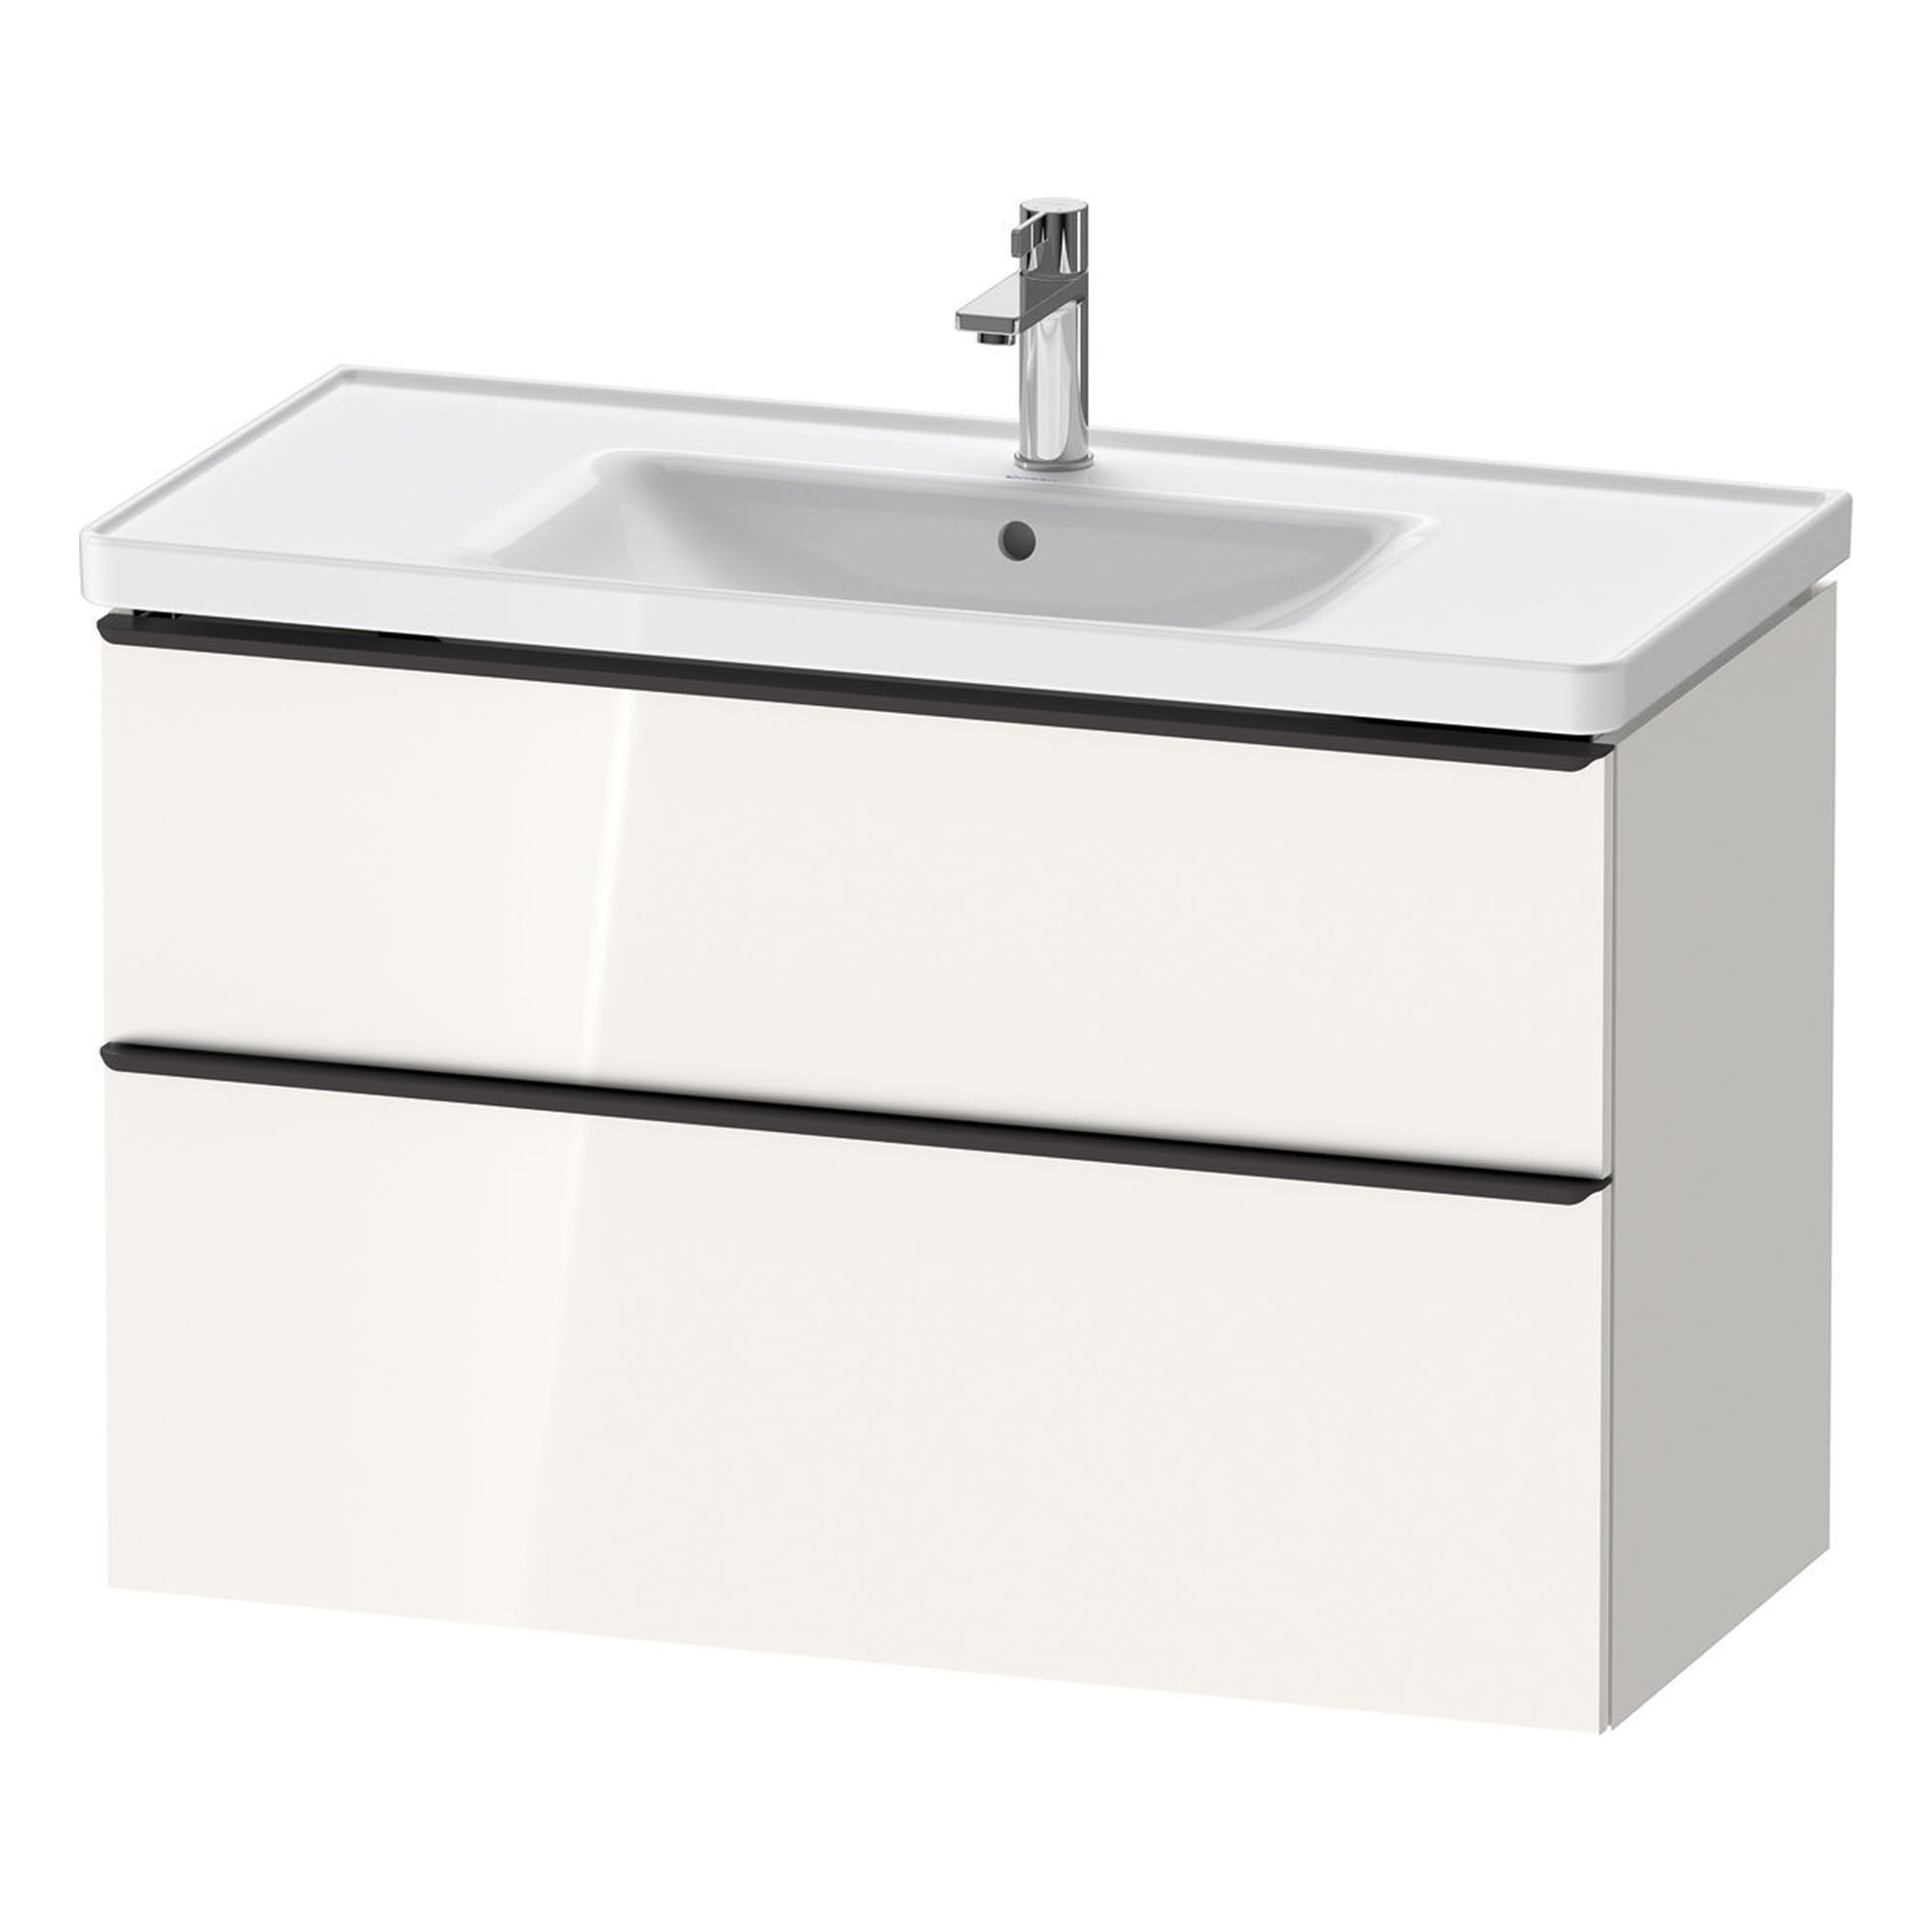 duravit d-neo 1000mm wall mounted vanity unit with d-neo basin gloss white diamond black handles